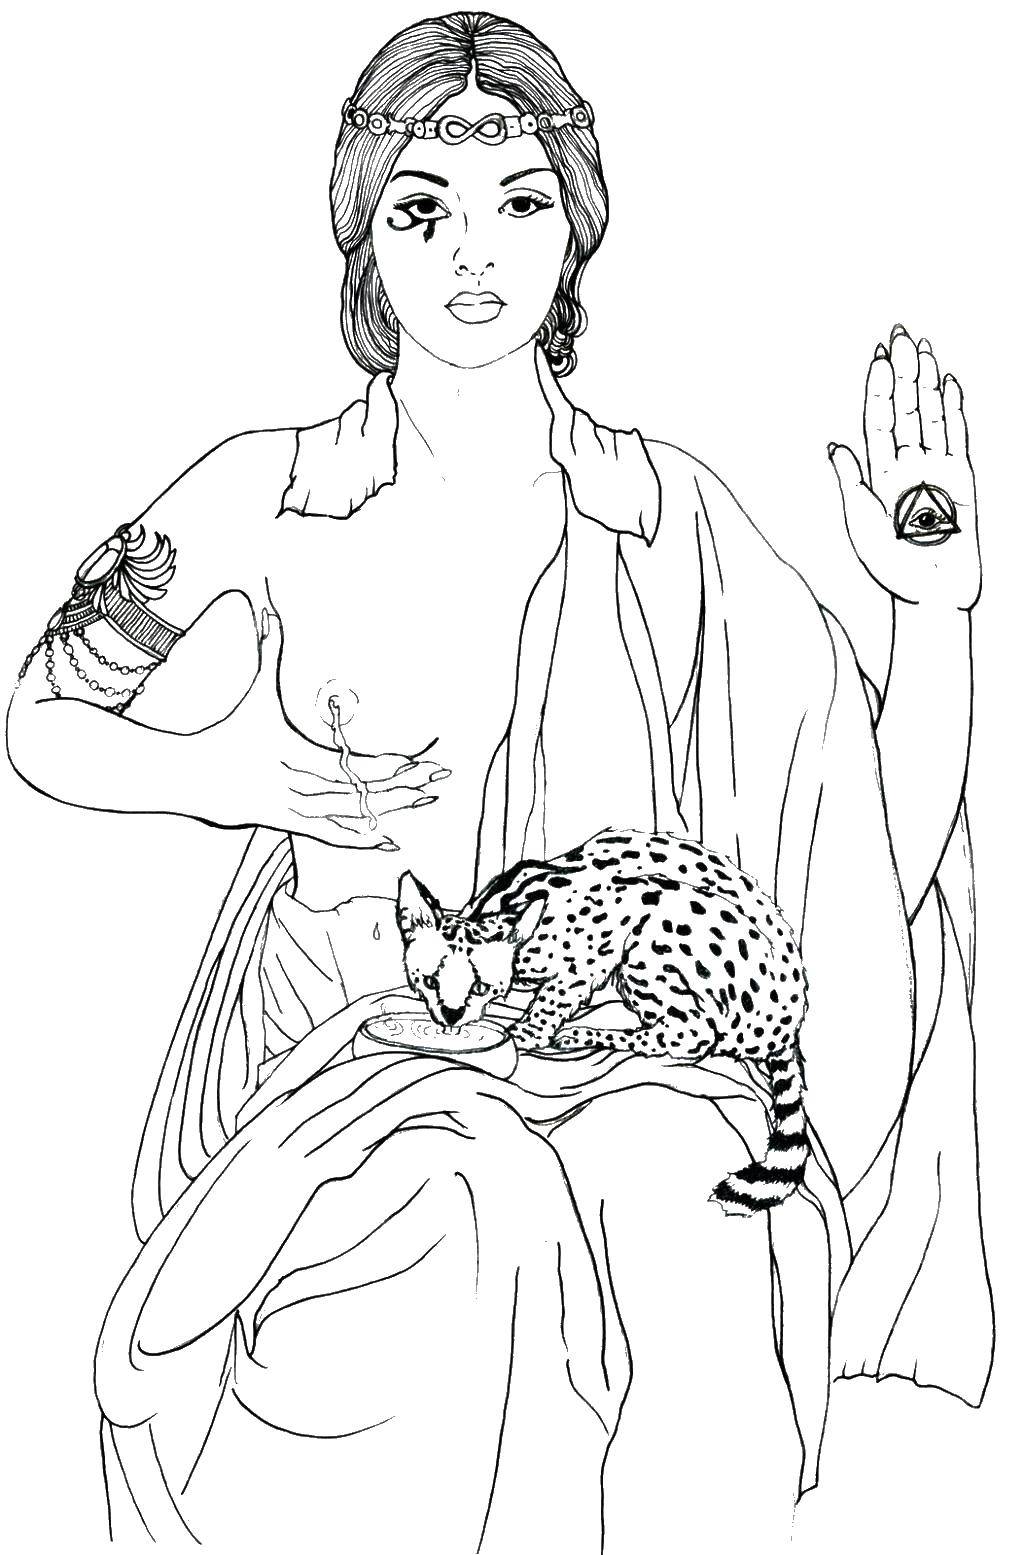 Coloring The goddess feeds the cat. Category religion. Tags:  the goddess, cat.